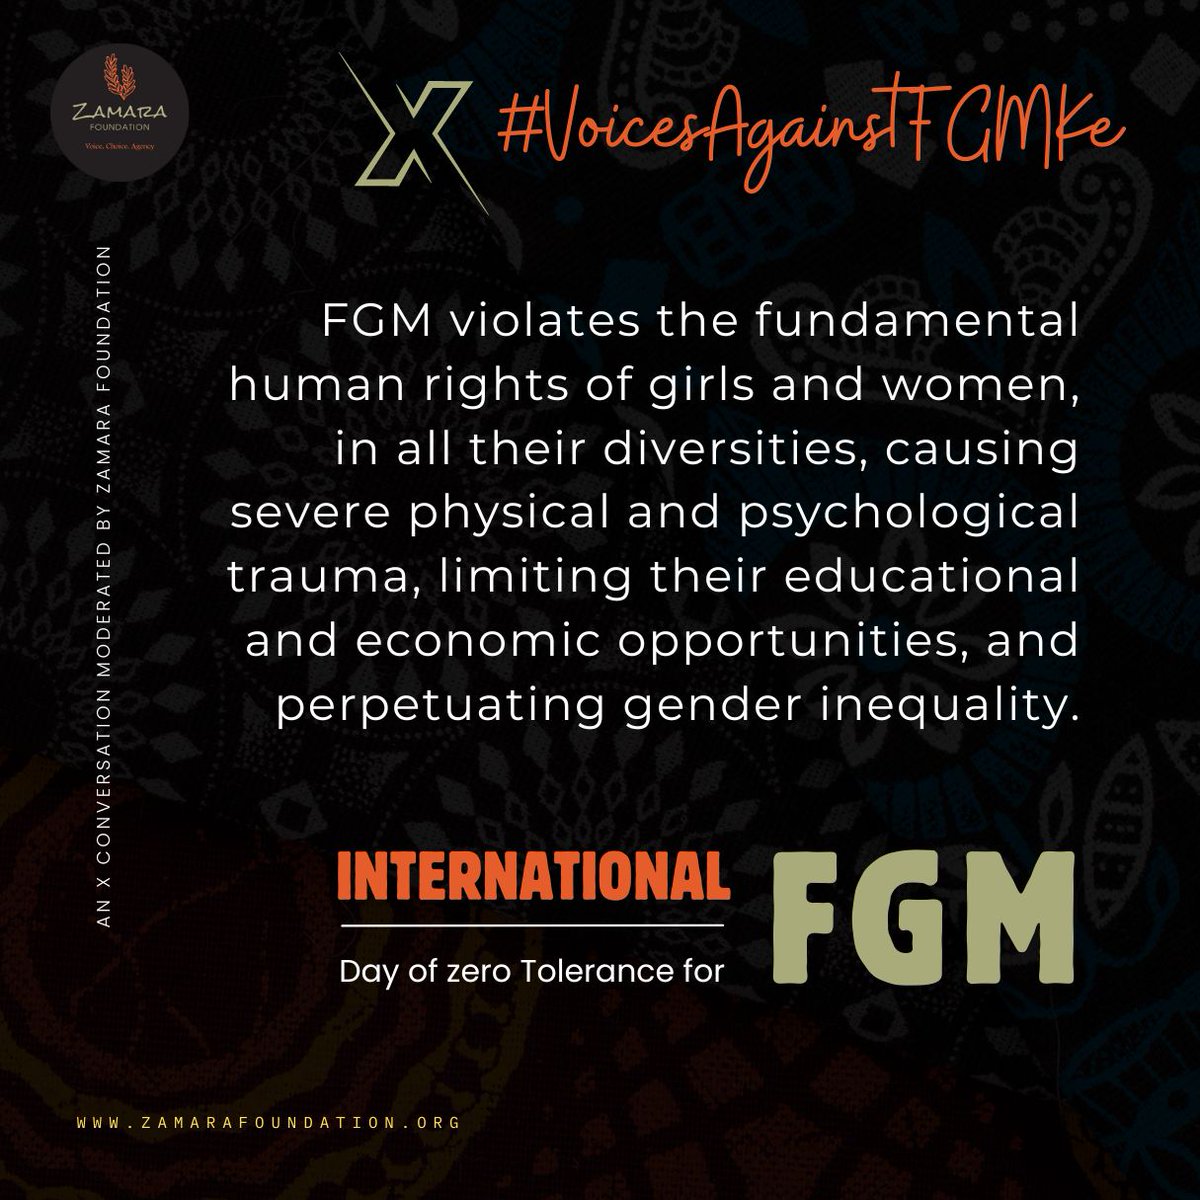 Let's face it. FGM is a grave violation of human rights, that robs women of their humanity and violates their right to life, health and dignity. It's time to end this harmful practice and uphold the rights of all individuals. #VoicesAgainstFGMKe #ZamaraVoices @Zamara_fdn